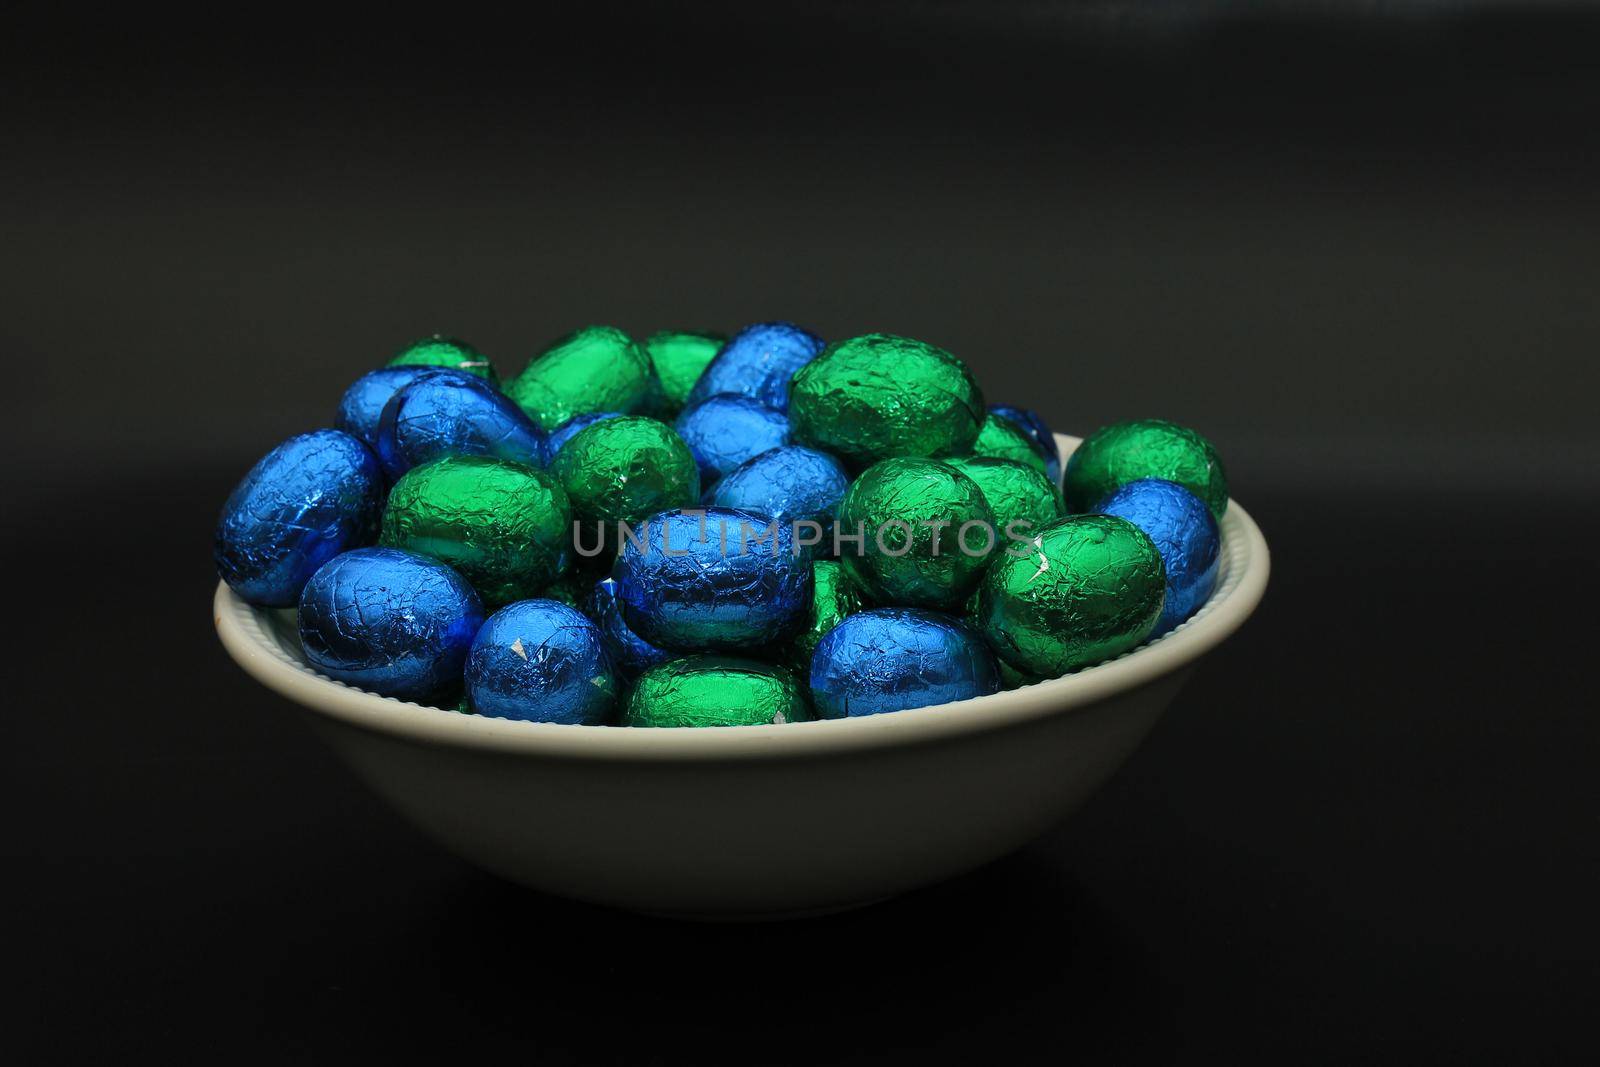 Foil wrapped chocolate easter eggs in a white porcelain bowl by studioportosabbia